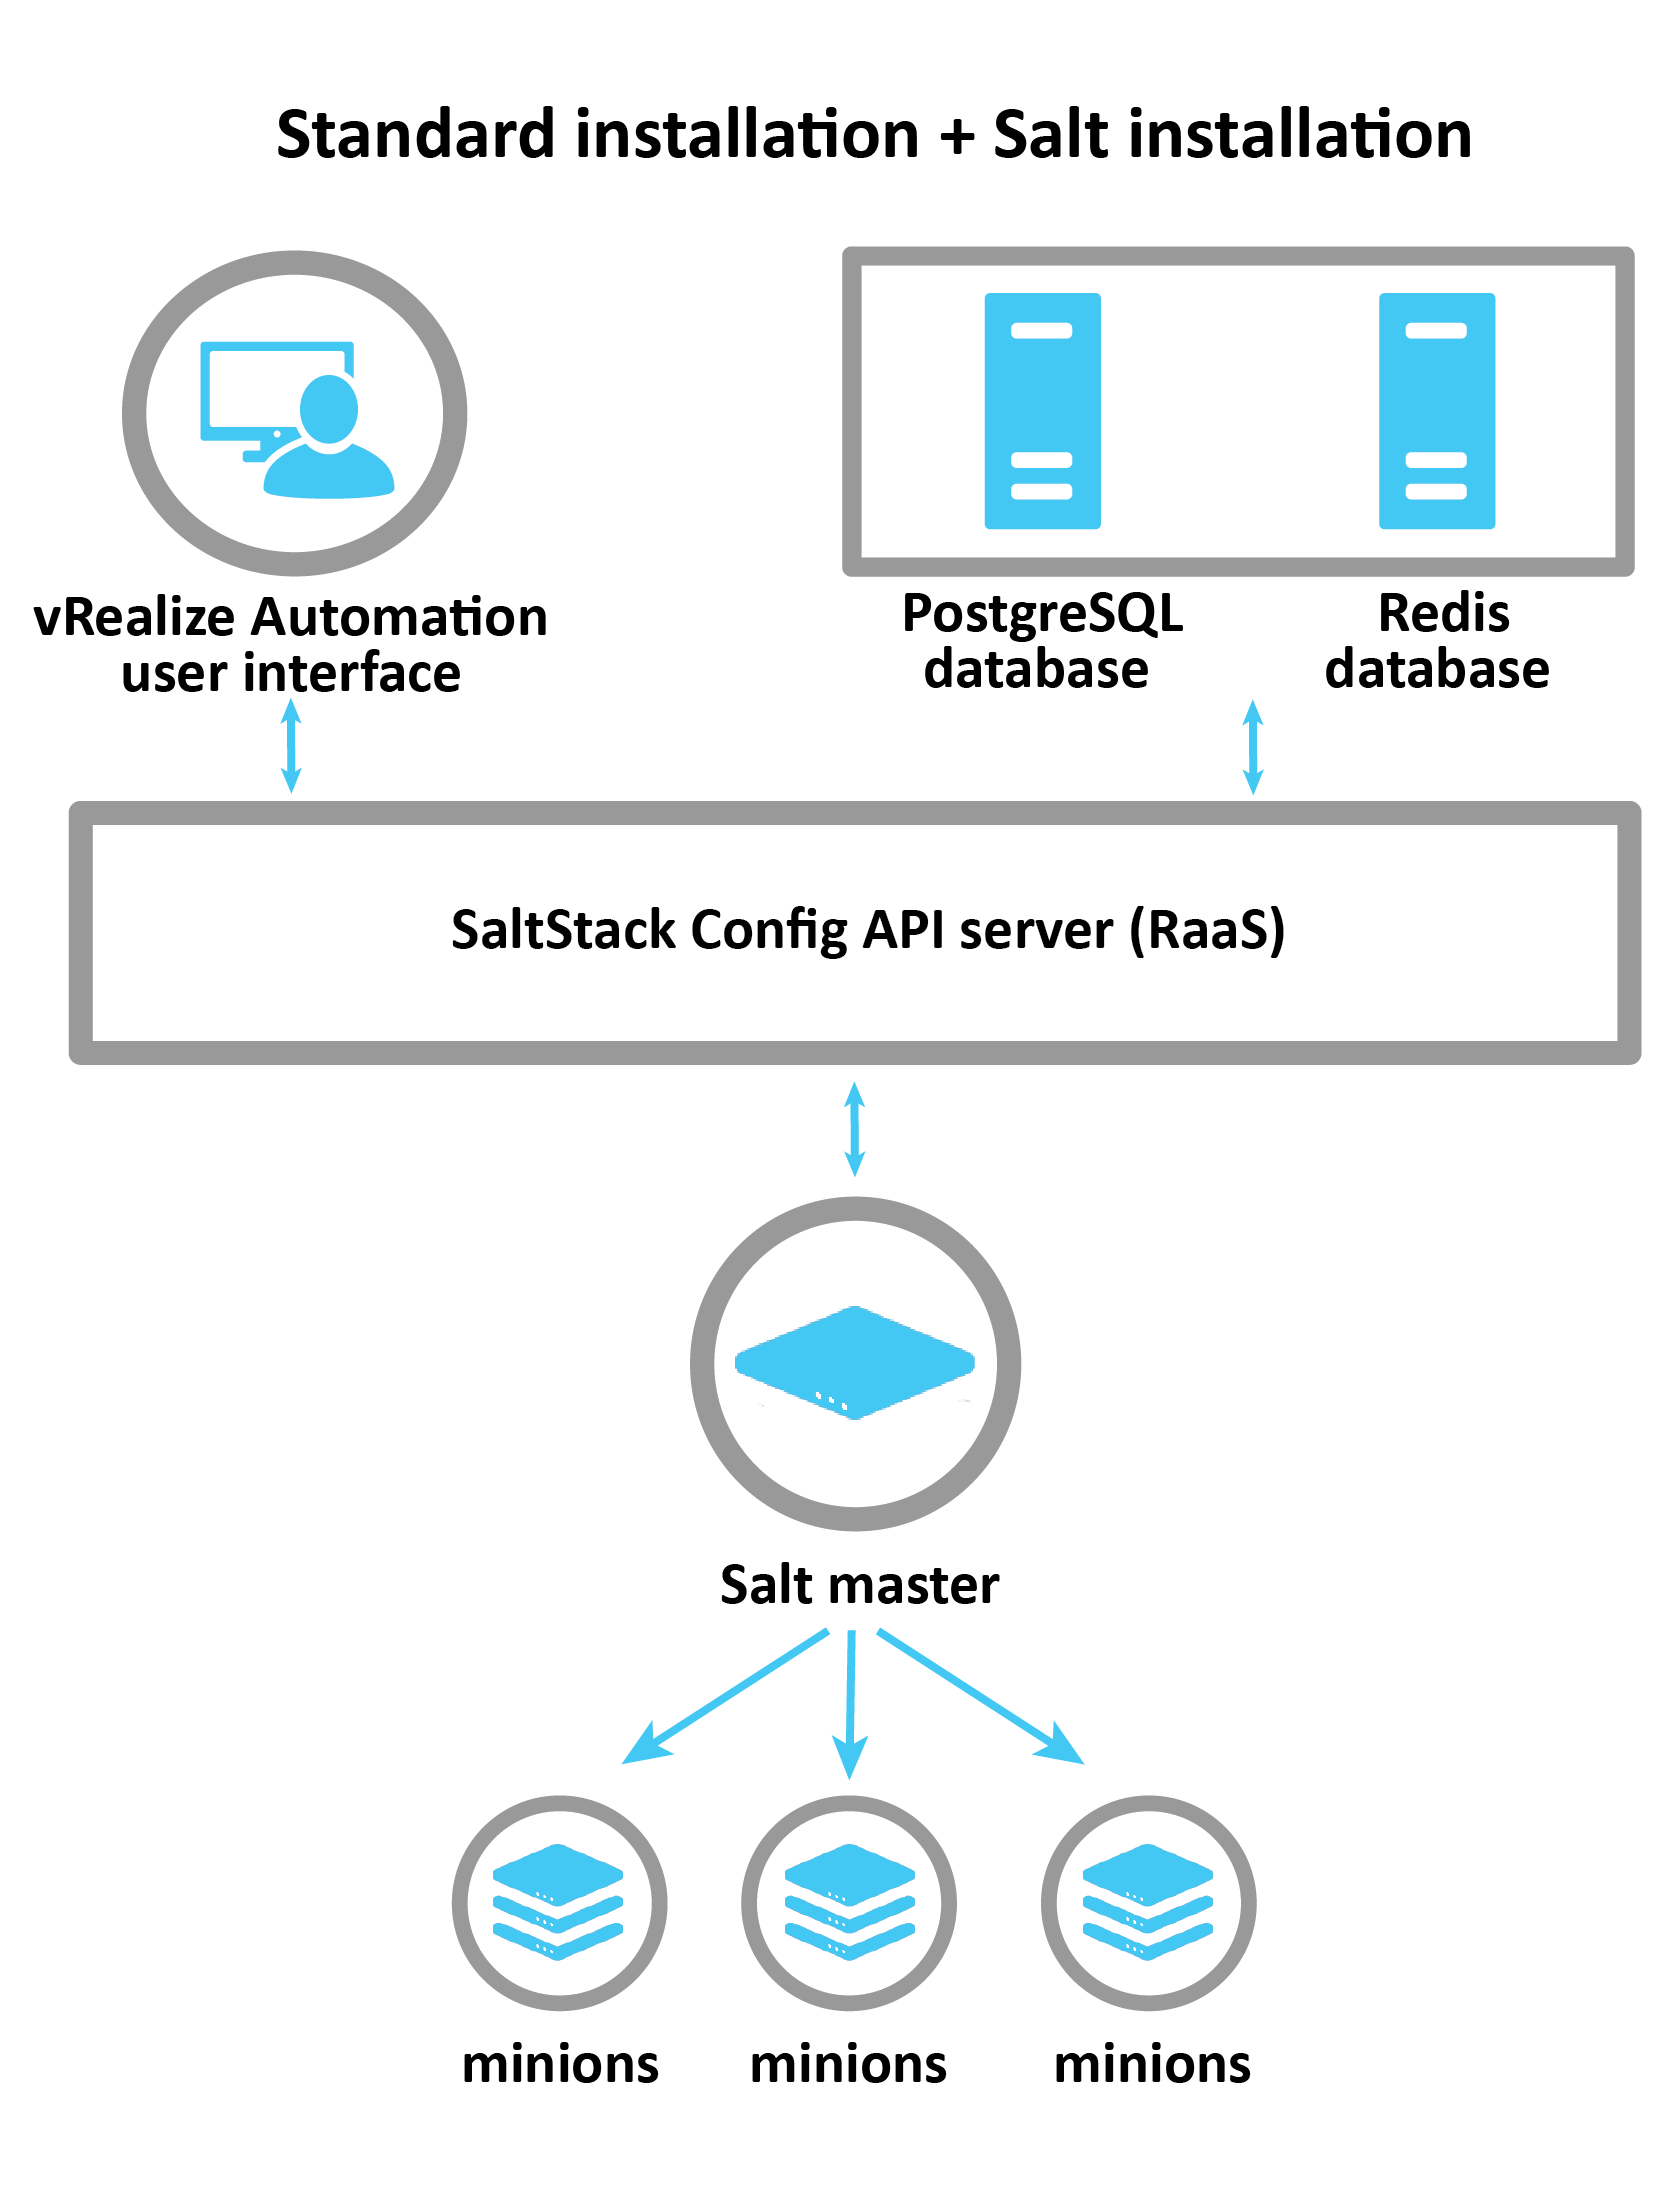 Diagram explaining how a standard installation of SaltStack and Salt works: vRA, Postgress and Redis connect to the RaaS server, which controls the Salt Master. The Salt Master then passes information to control individual minions.